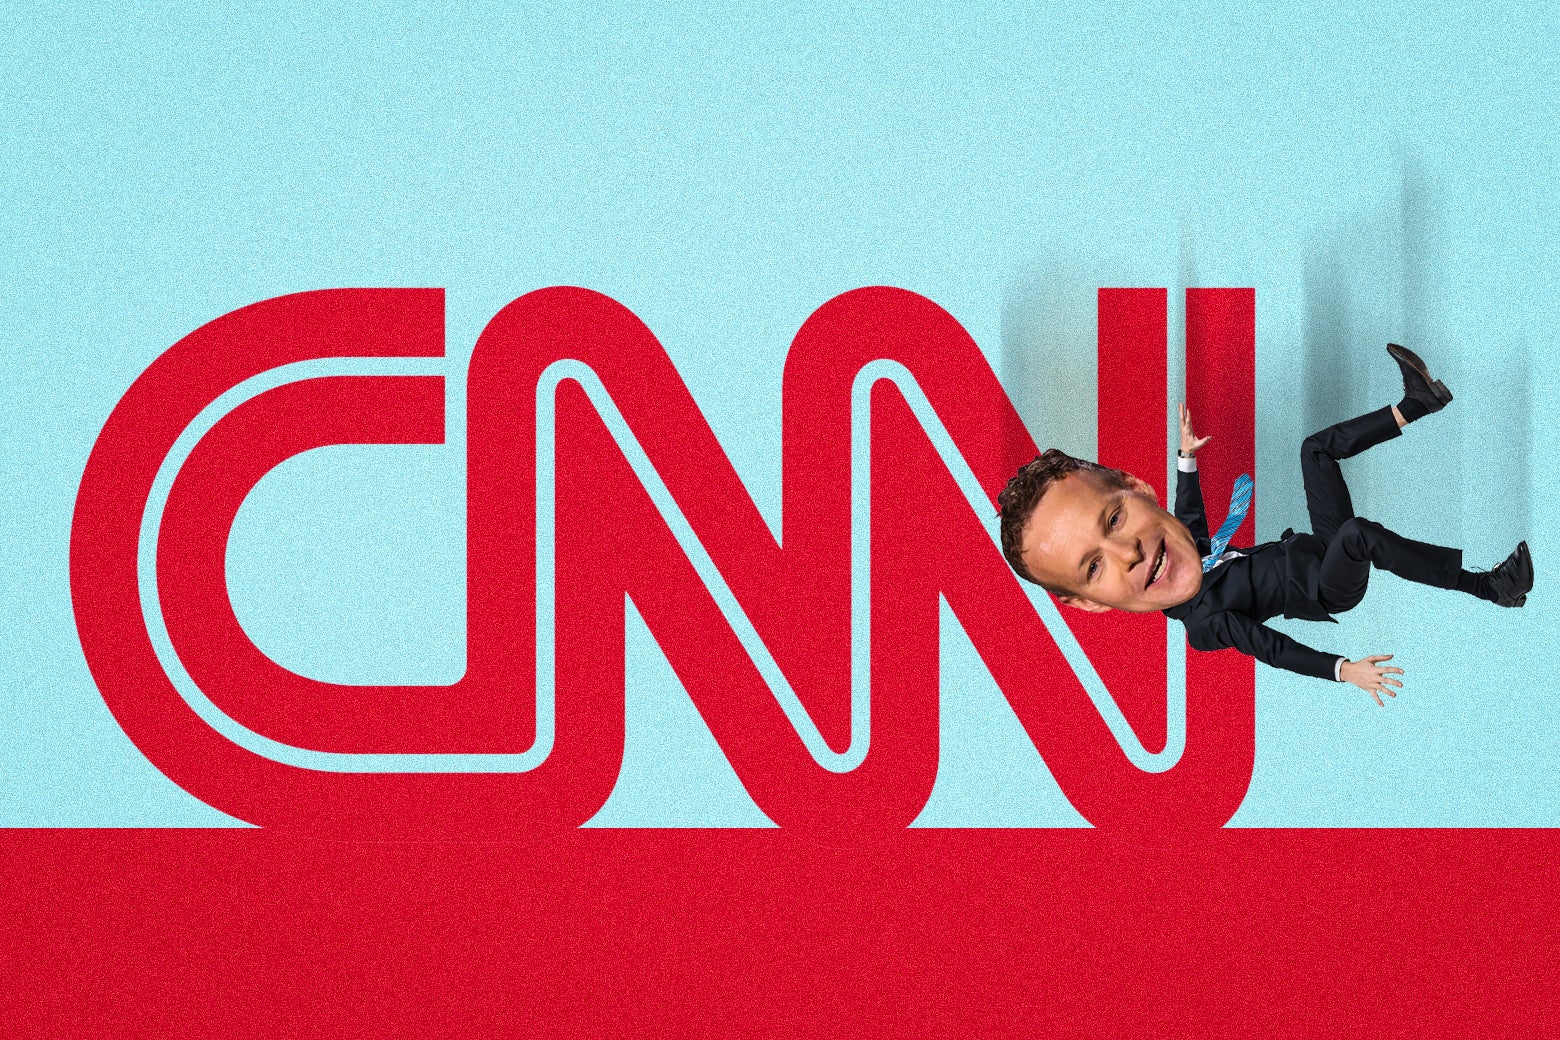 Chris Licht Failed at CNN. And So Did His One Big Idea. Justin Peters